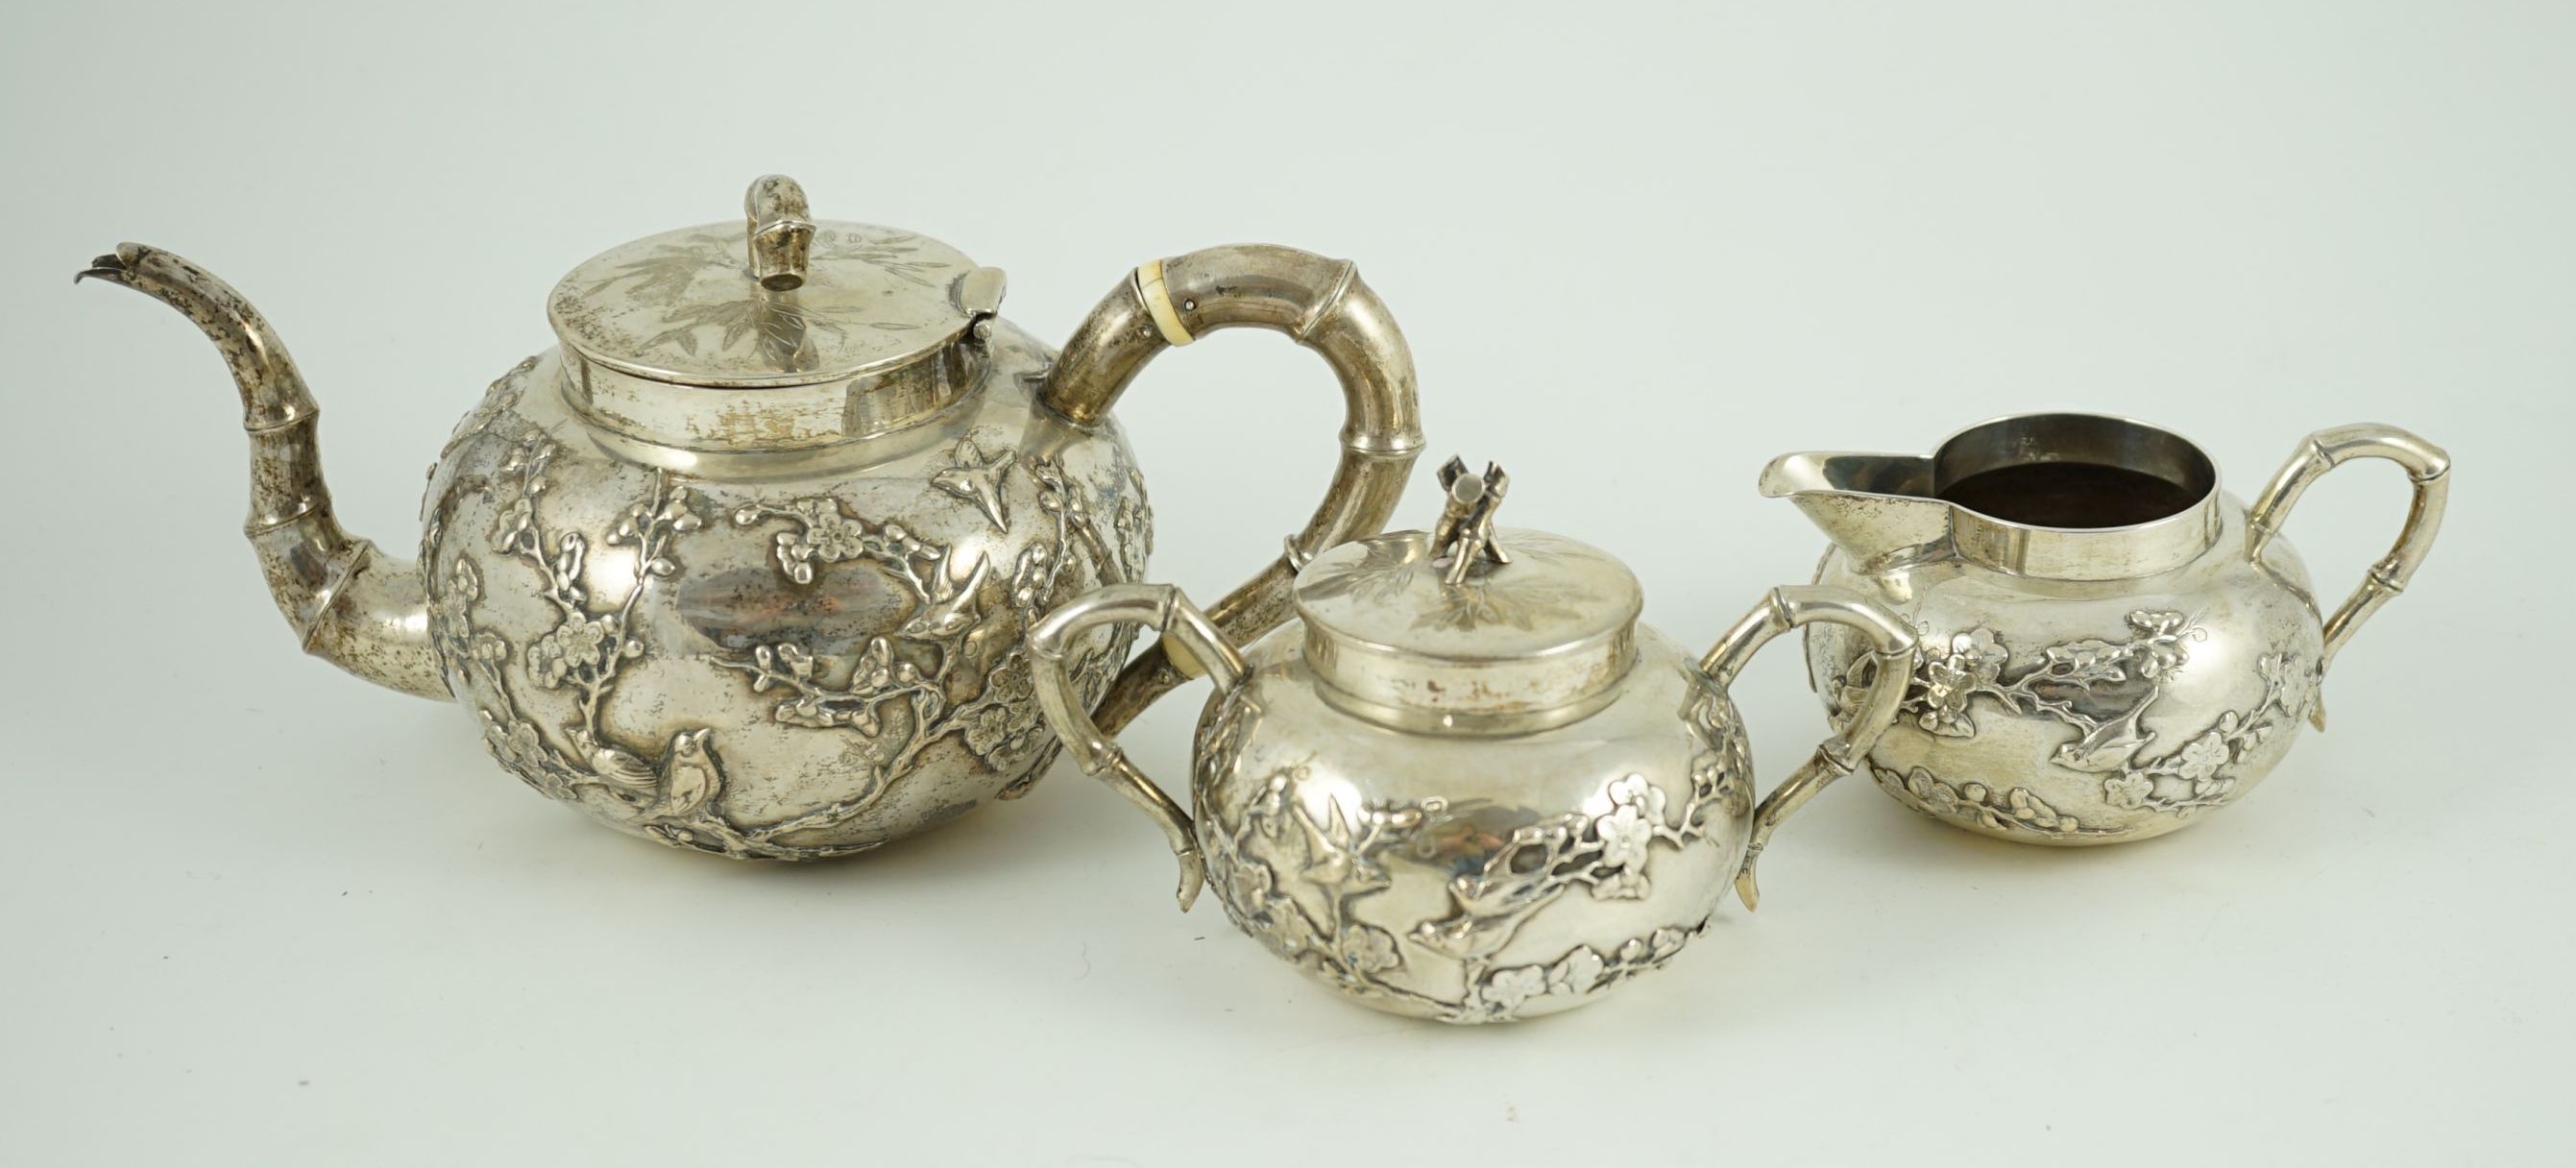 A 19th century Chinese Export silver three piece tea set by Cumshing?